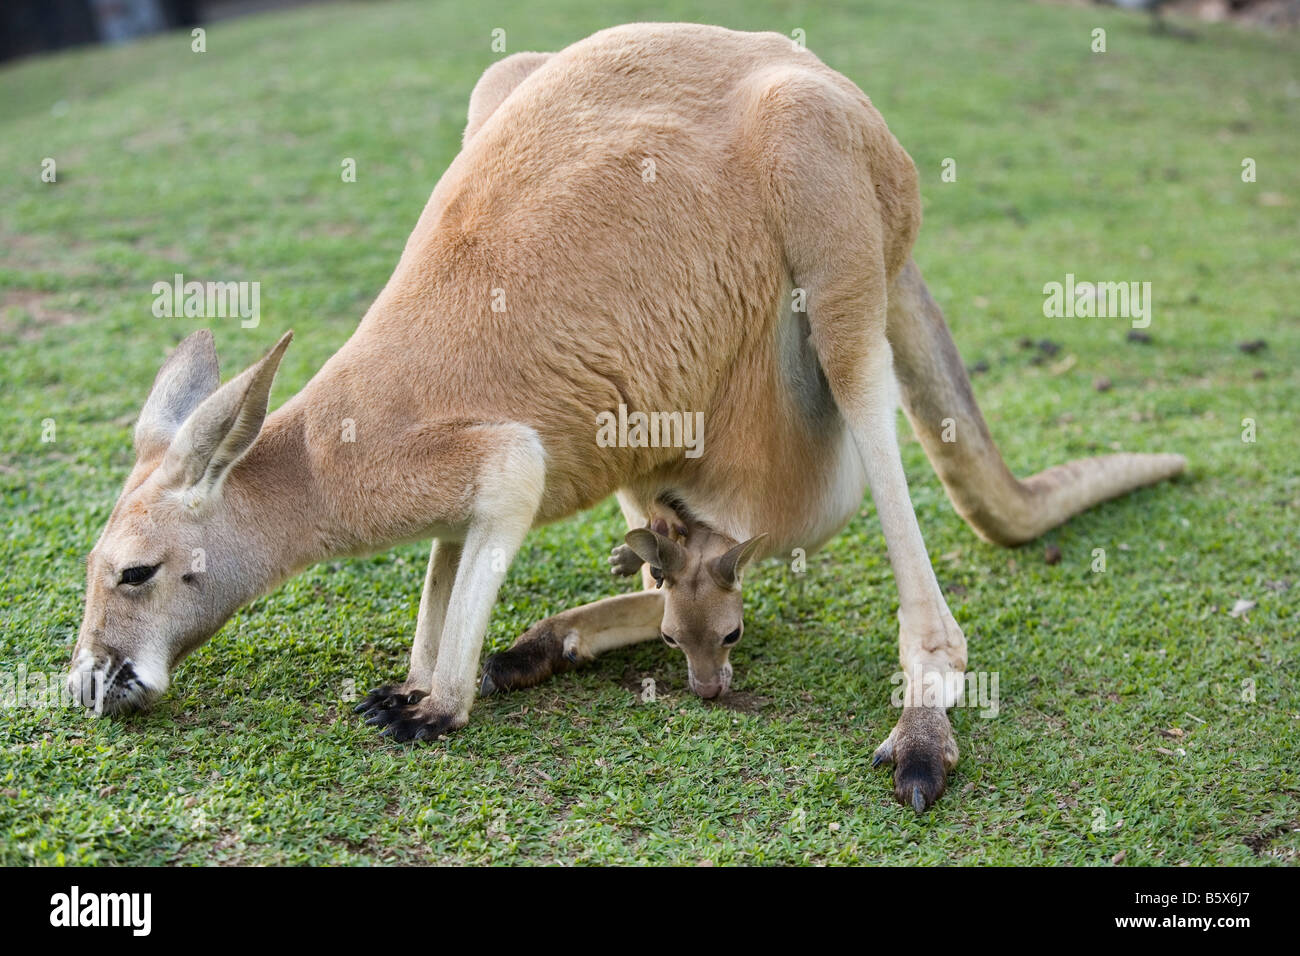 Kangaroo mother with Joey in pouch Stock Photo